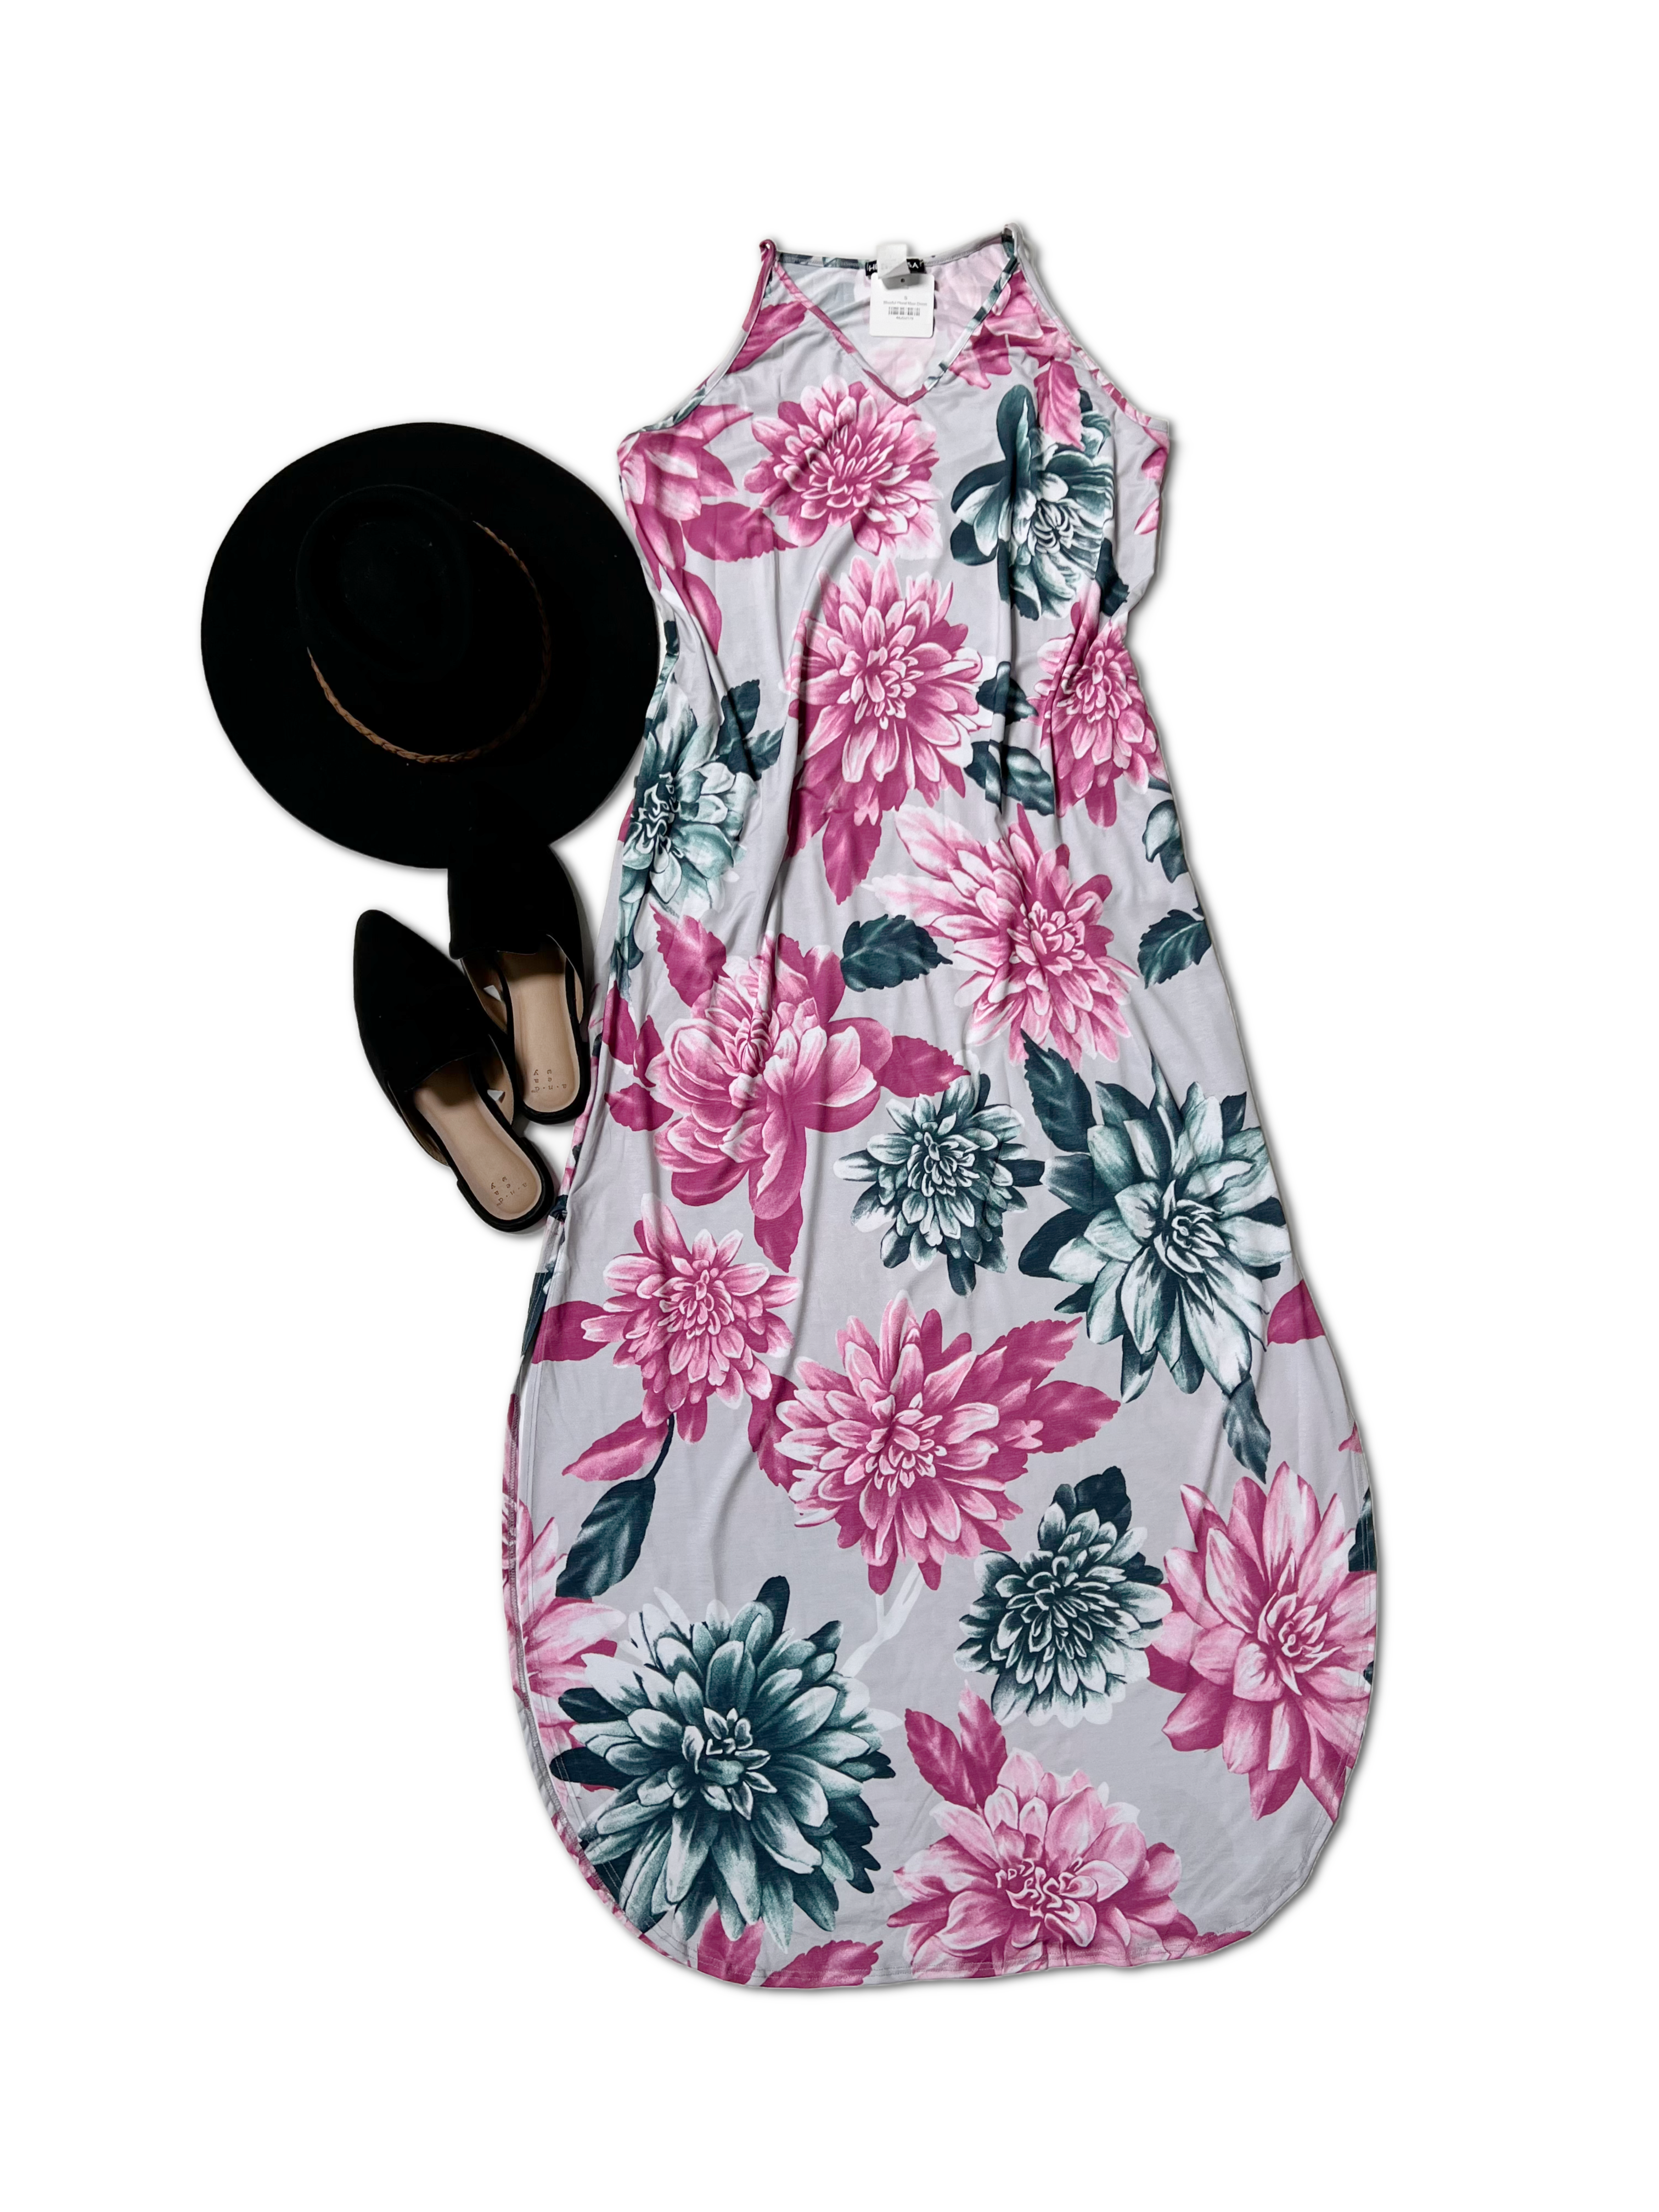 Blissful Floral Maxi Dress Boutique Simplified